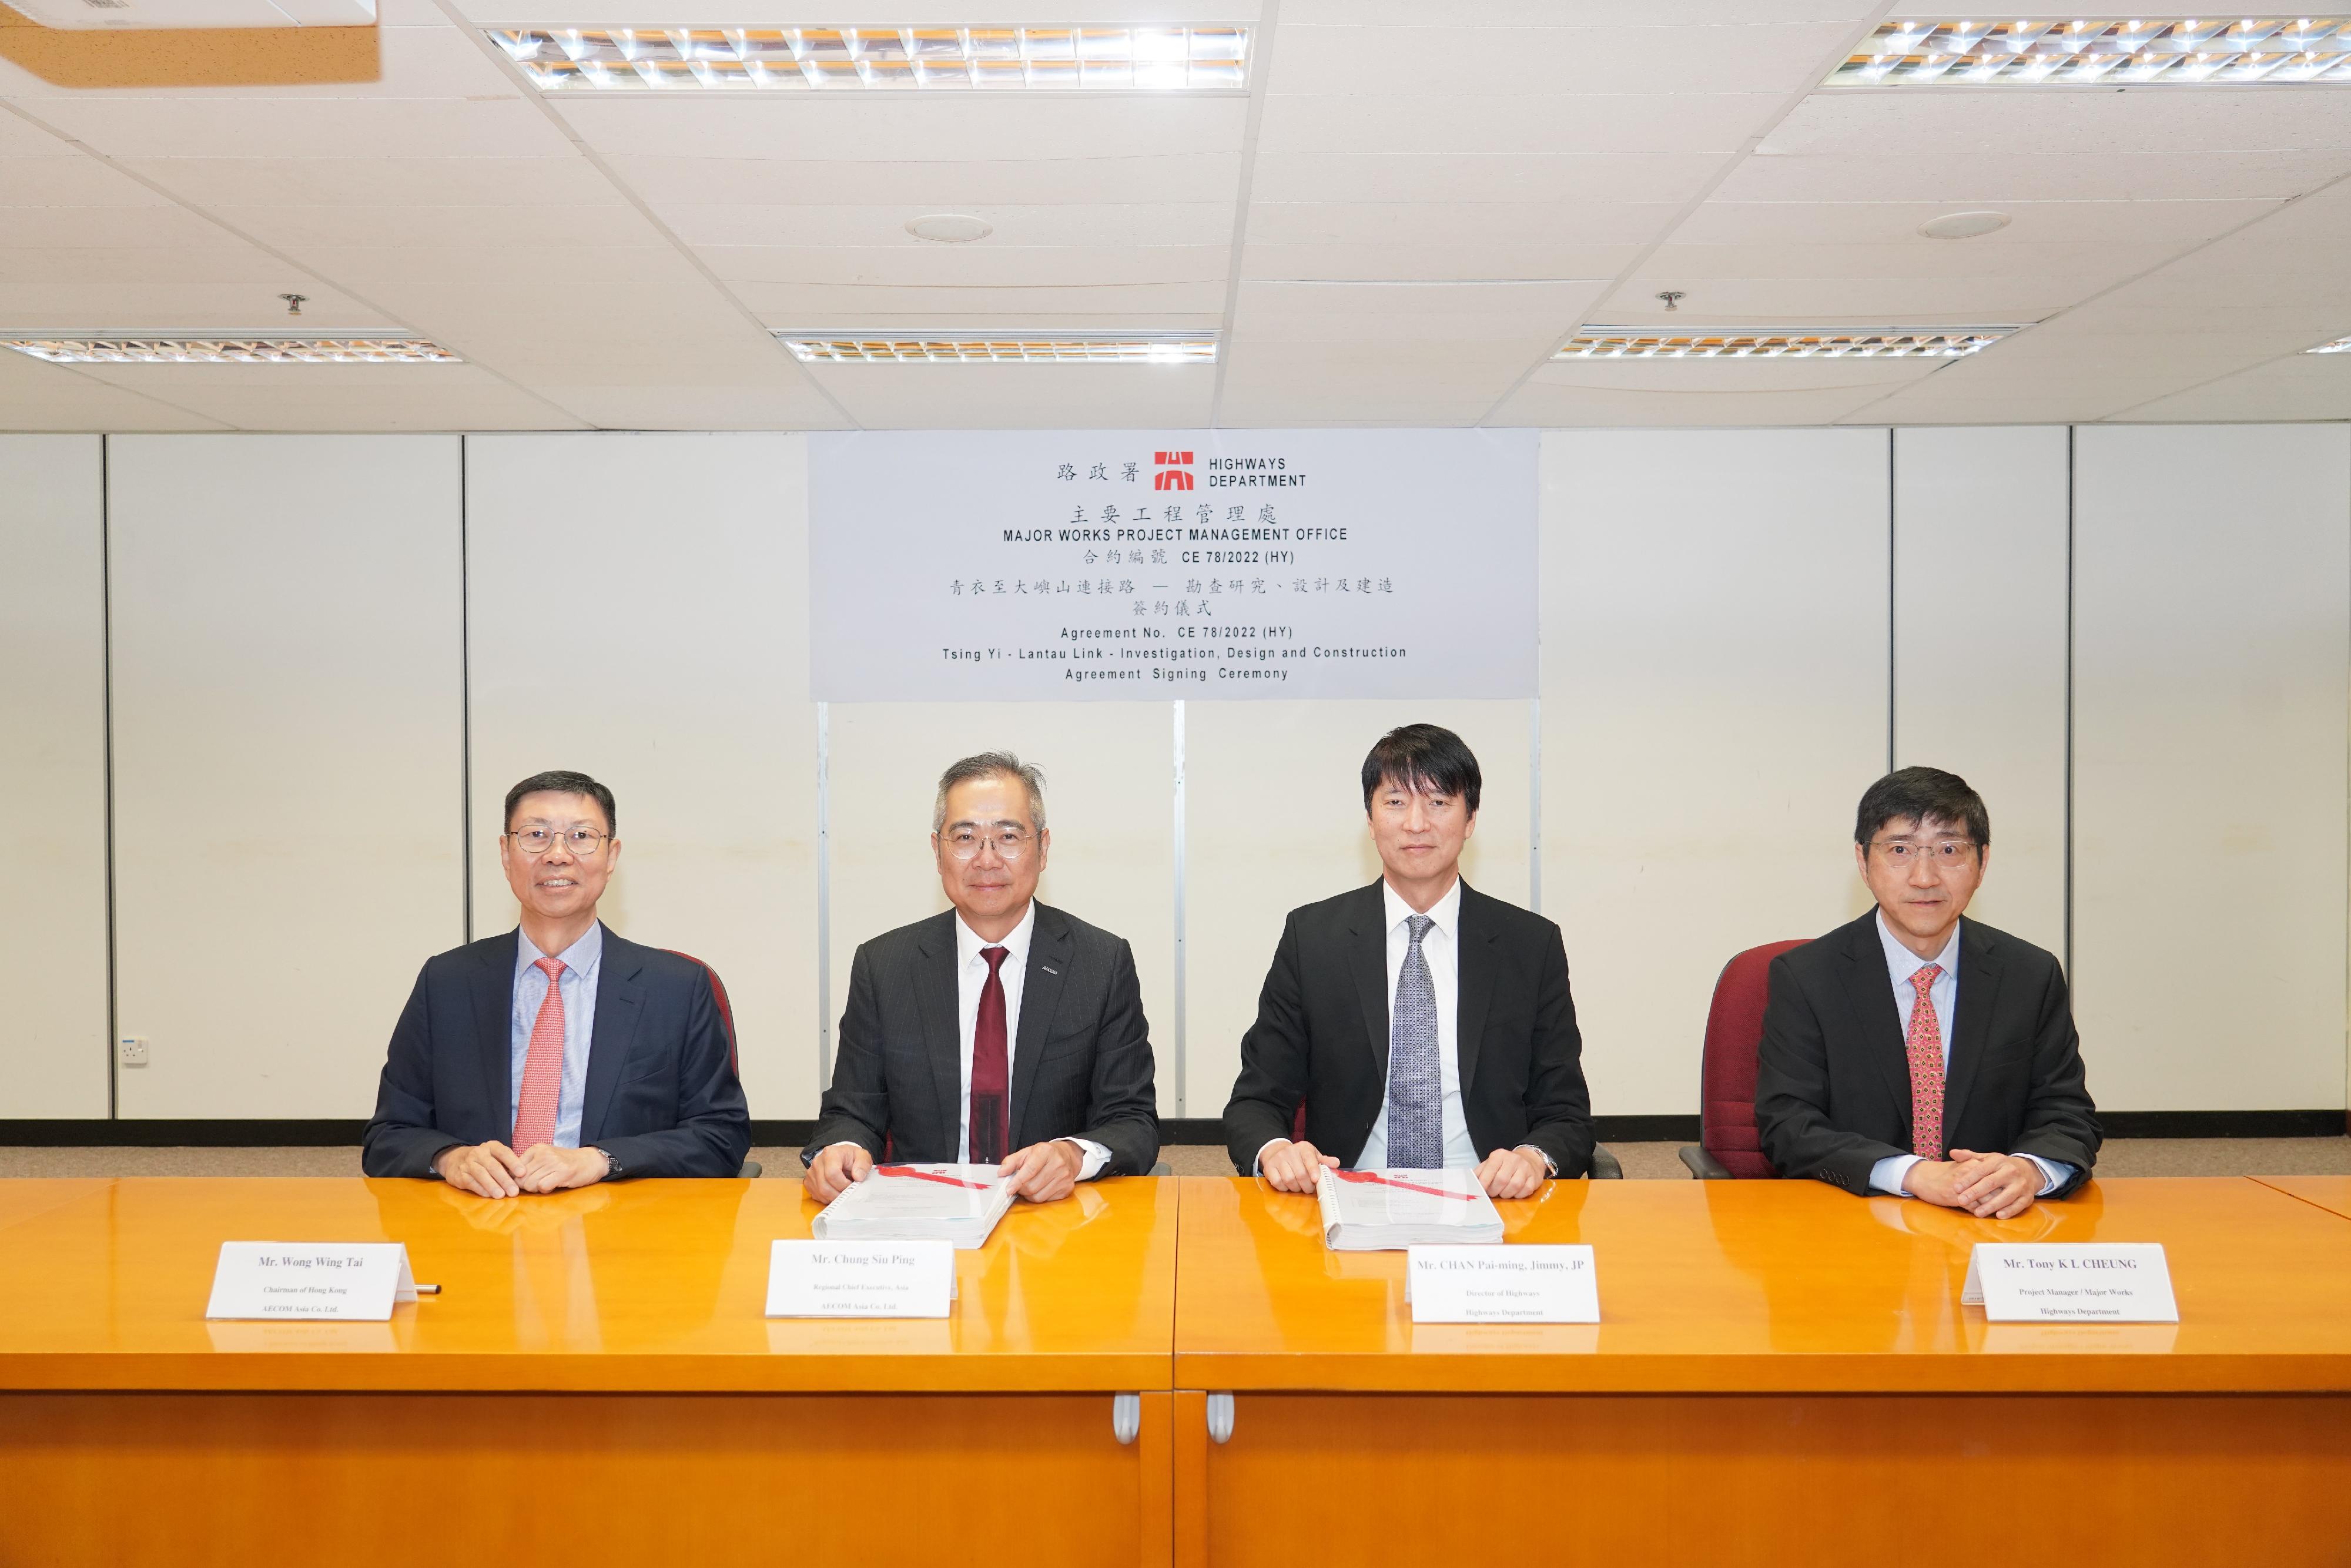 The Highways Department today (May 12) signed an investigation, design and construction consultancy agreement with AECOM Asia Company Limited for the Tsing Yi - Lantau Link project. Photo shows the Director of Highways, Mr Jimmy Chan (second right), and representatives from AECOM Asia Company Limited at the agreement signing ceremony.